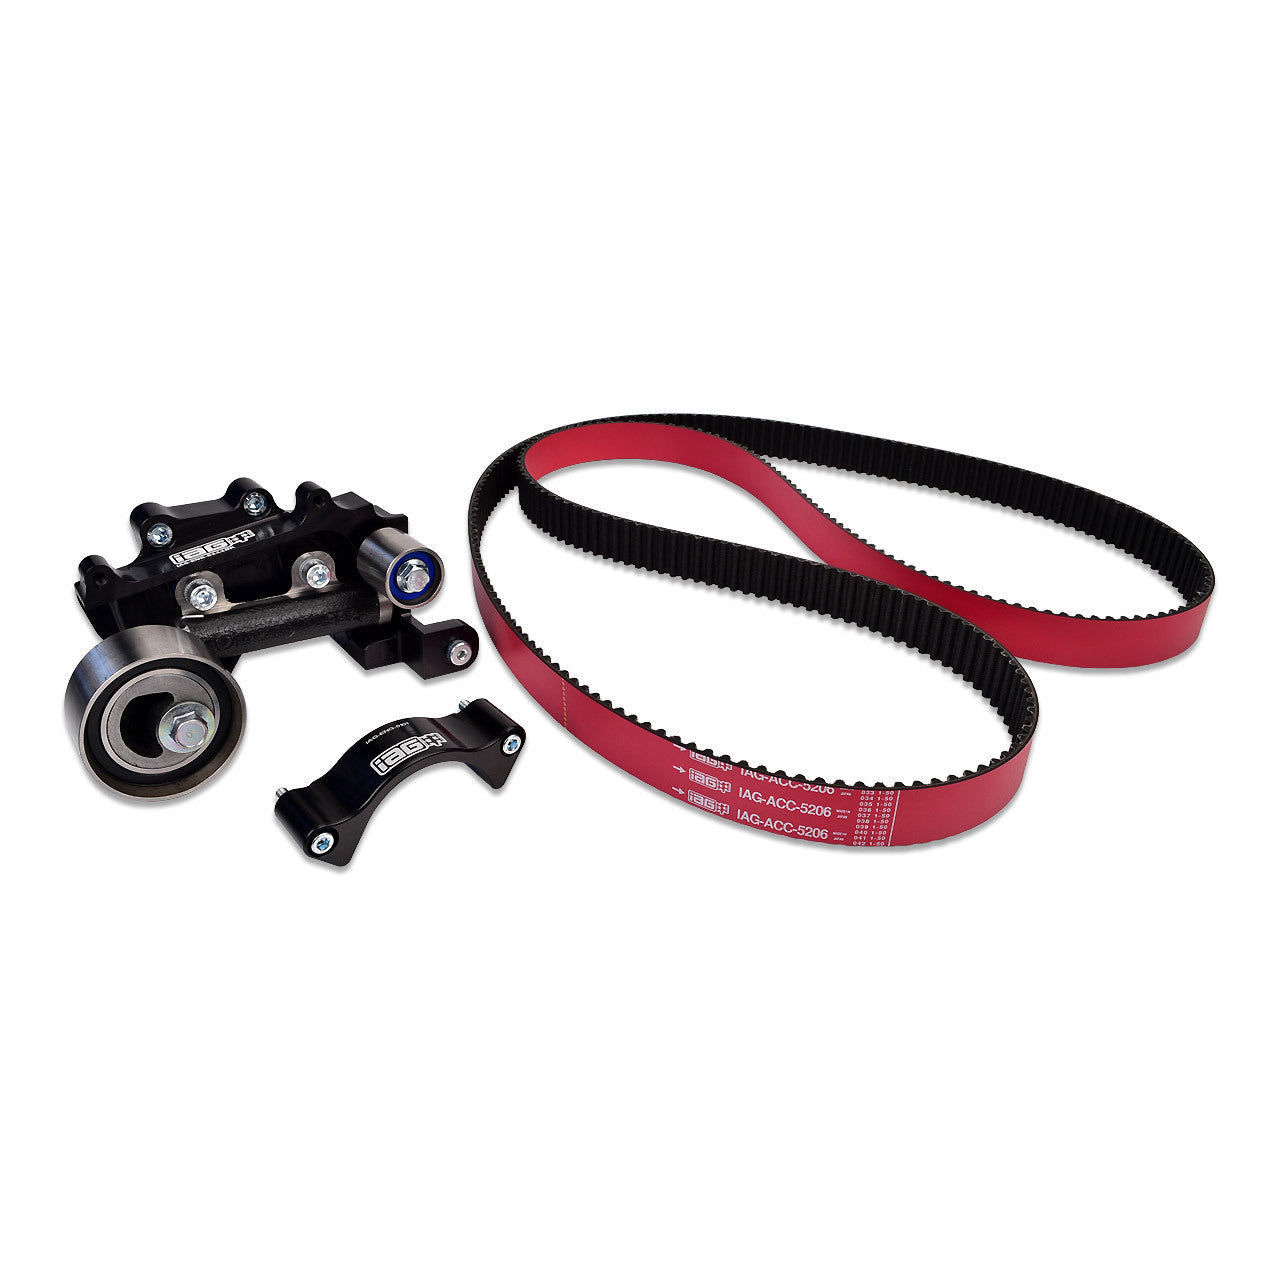 IAG Timing Guide, Comp Tensioner & Racing Timing Belt Kit for 02-14 WRX, 04-21 STI, 04-13 FXT, 05-12 LGT - Dirty Racing Products